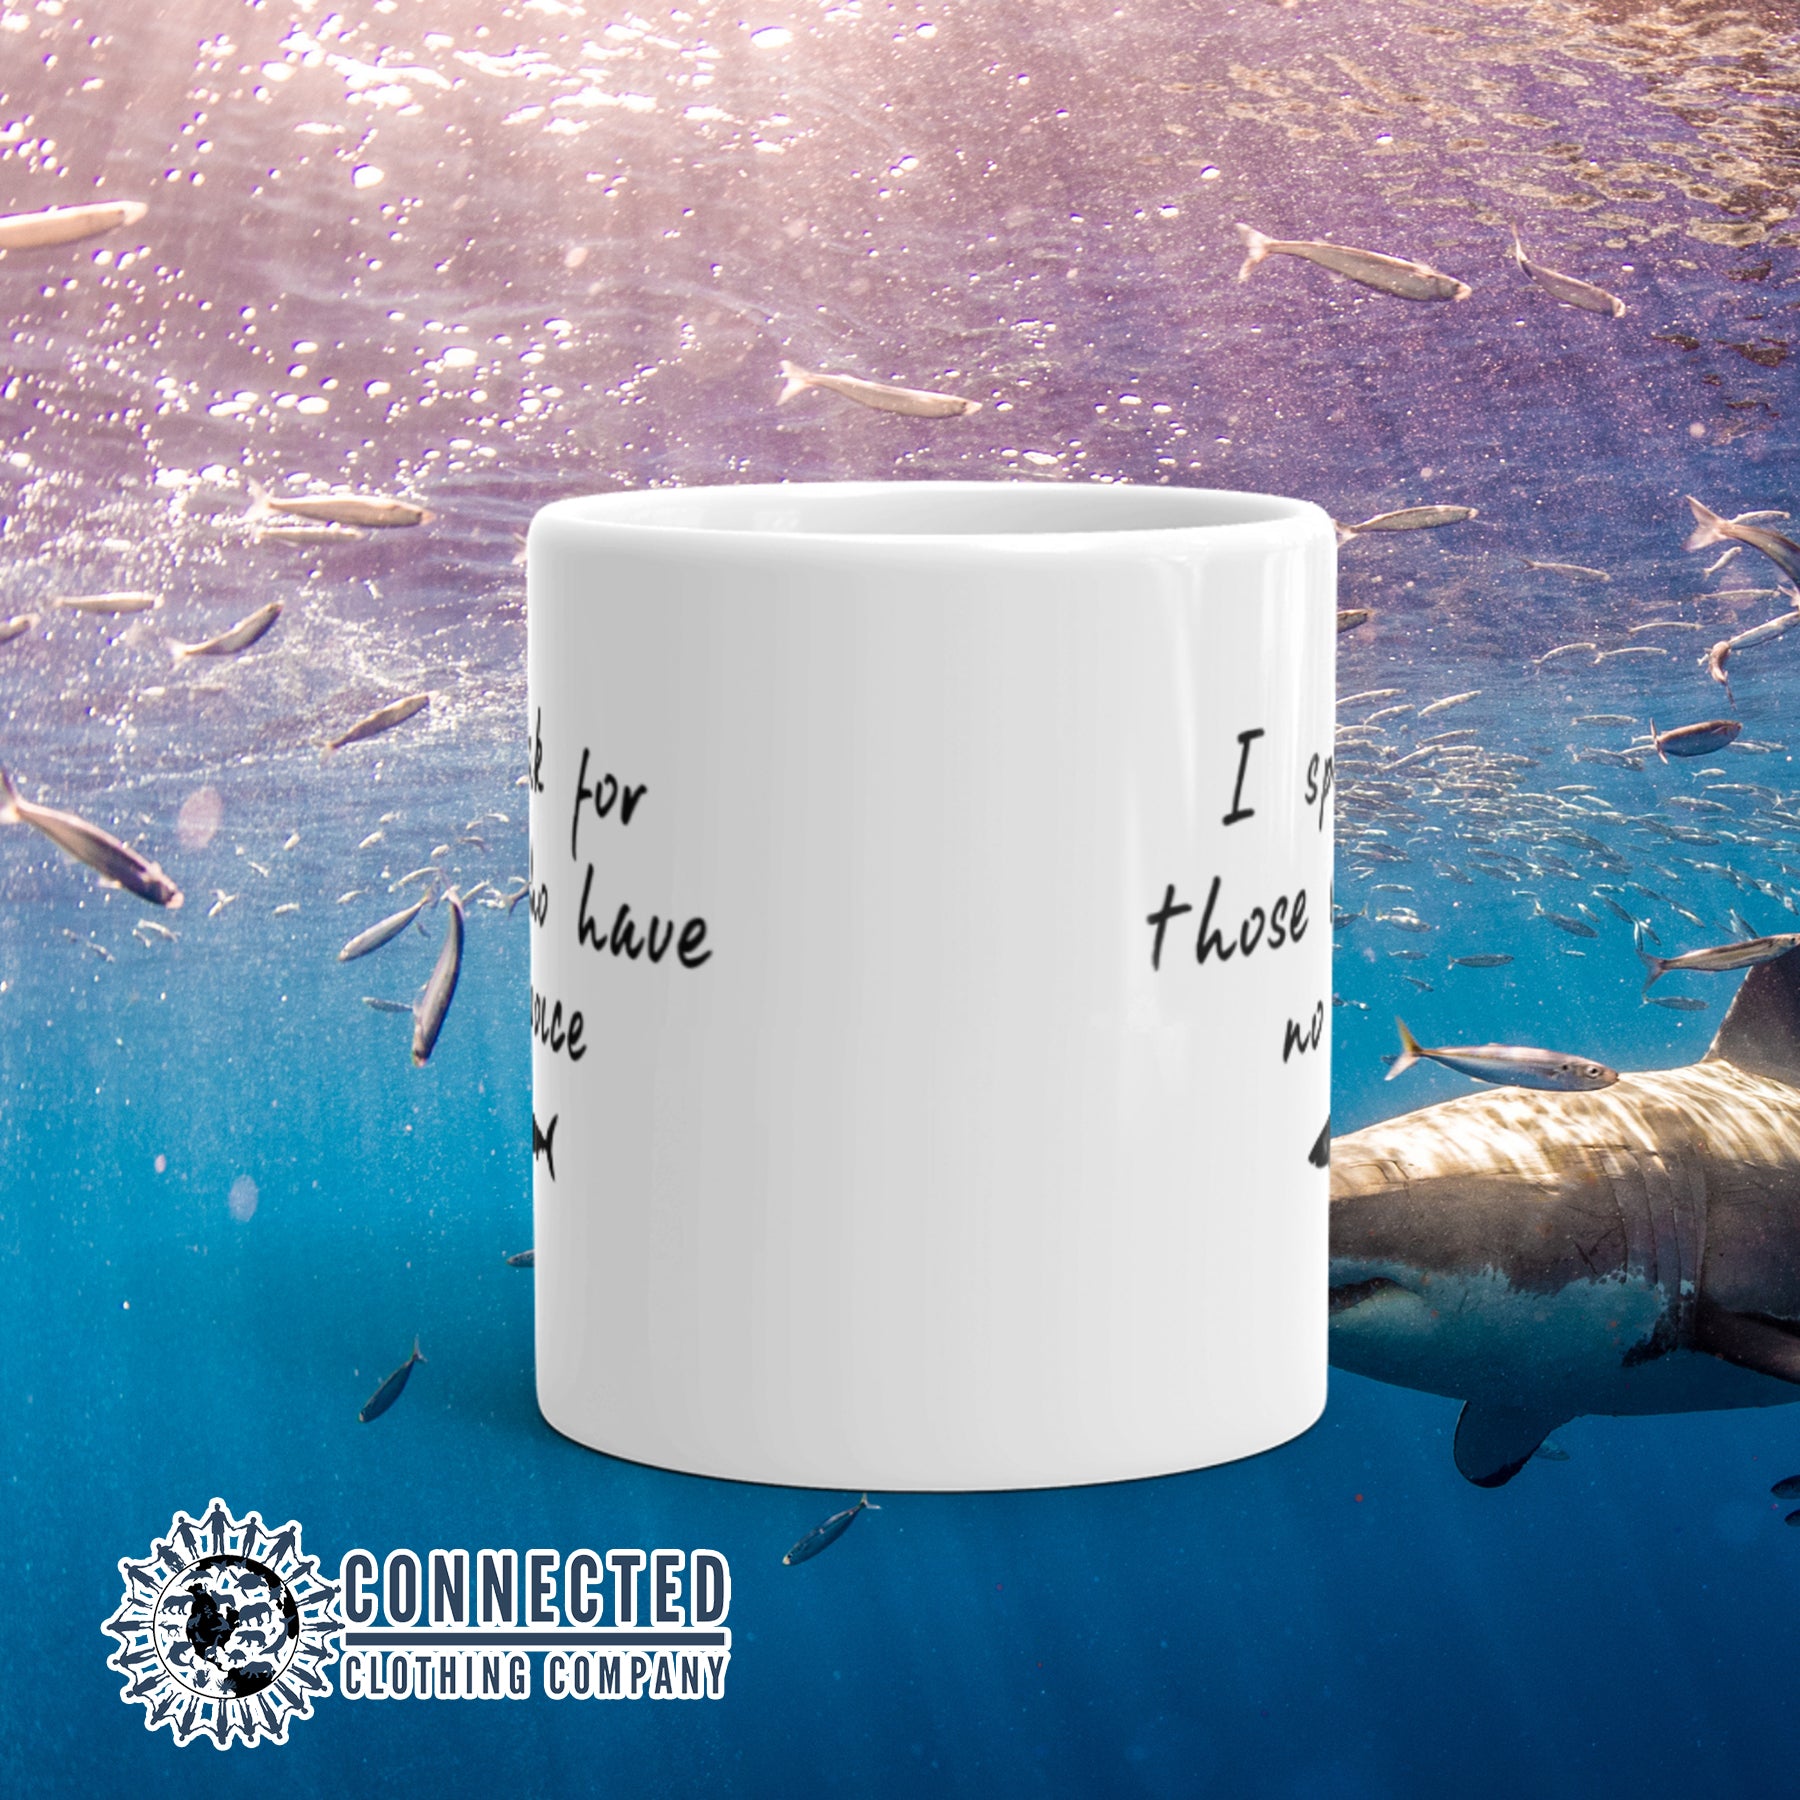 Be The Voice Shark Classic Mug reads "I speak for those who have no voice." - sweetsherriloudesigns - Ethically and Sustainably Made - 10% donated to Oceana shark conservation